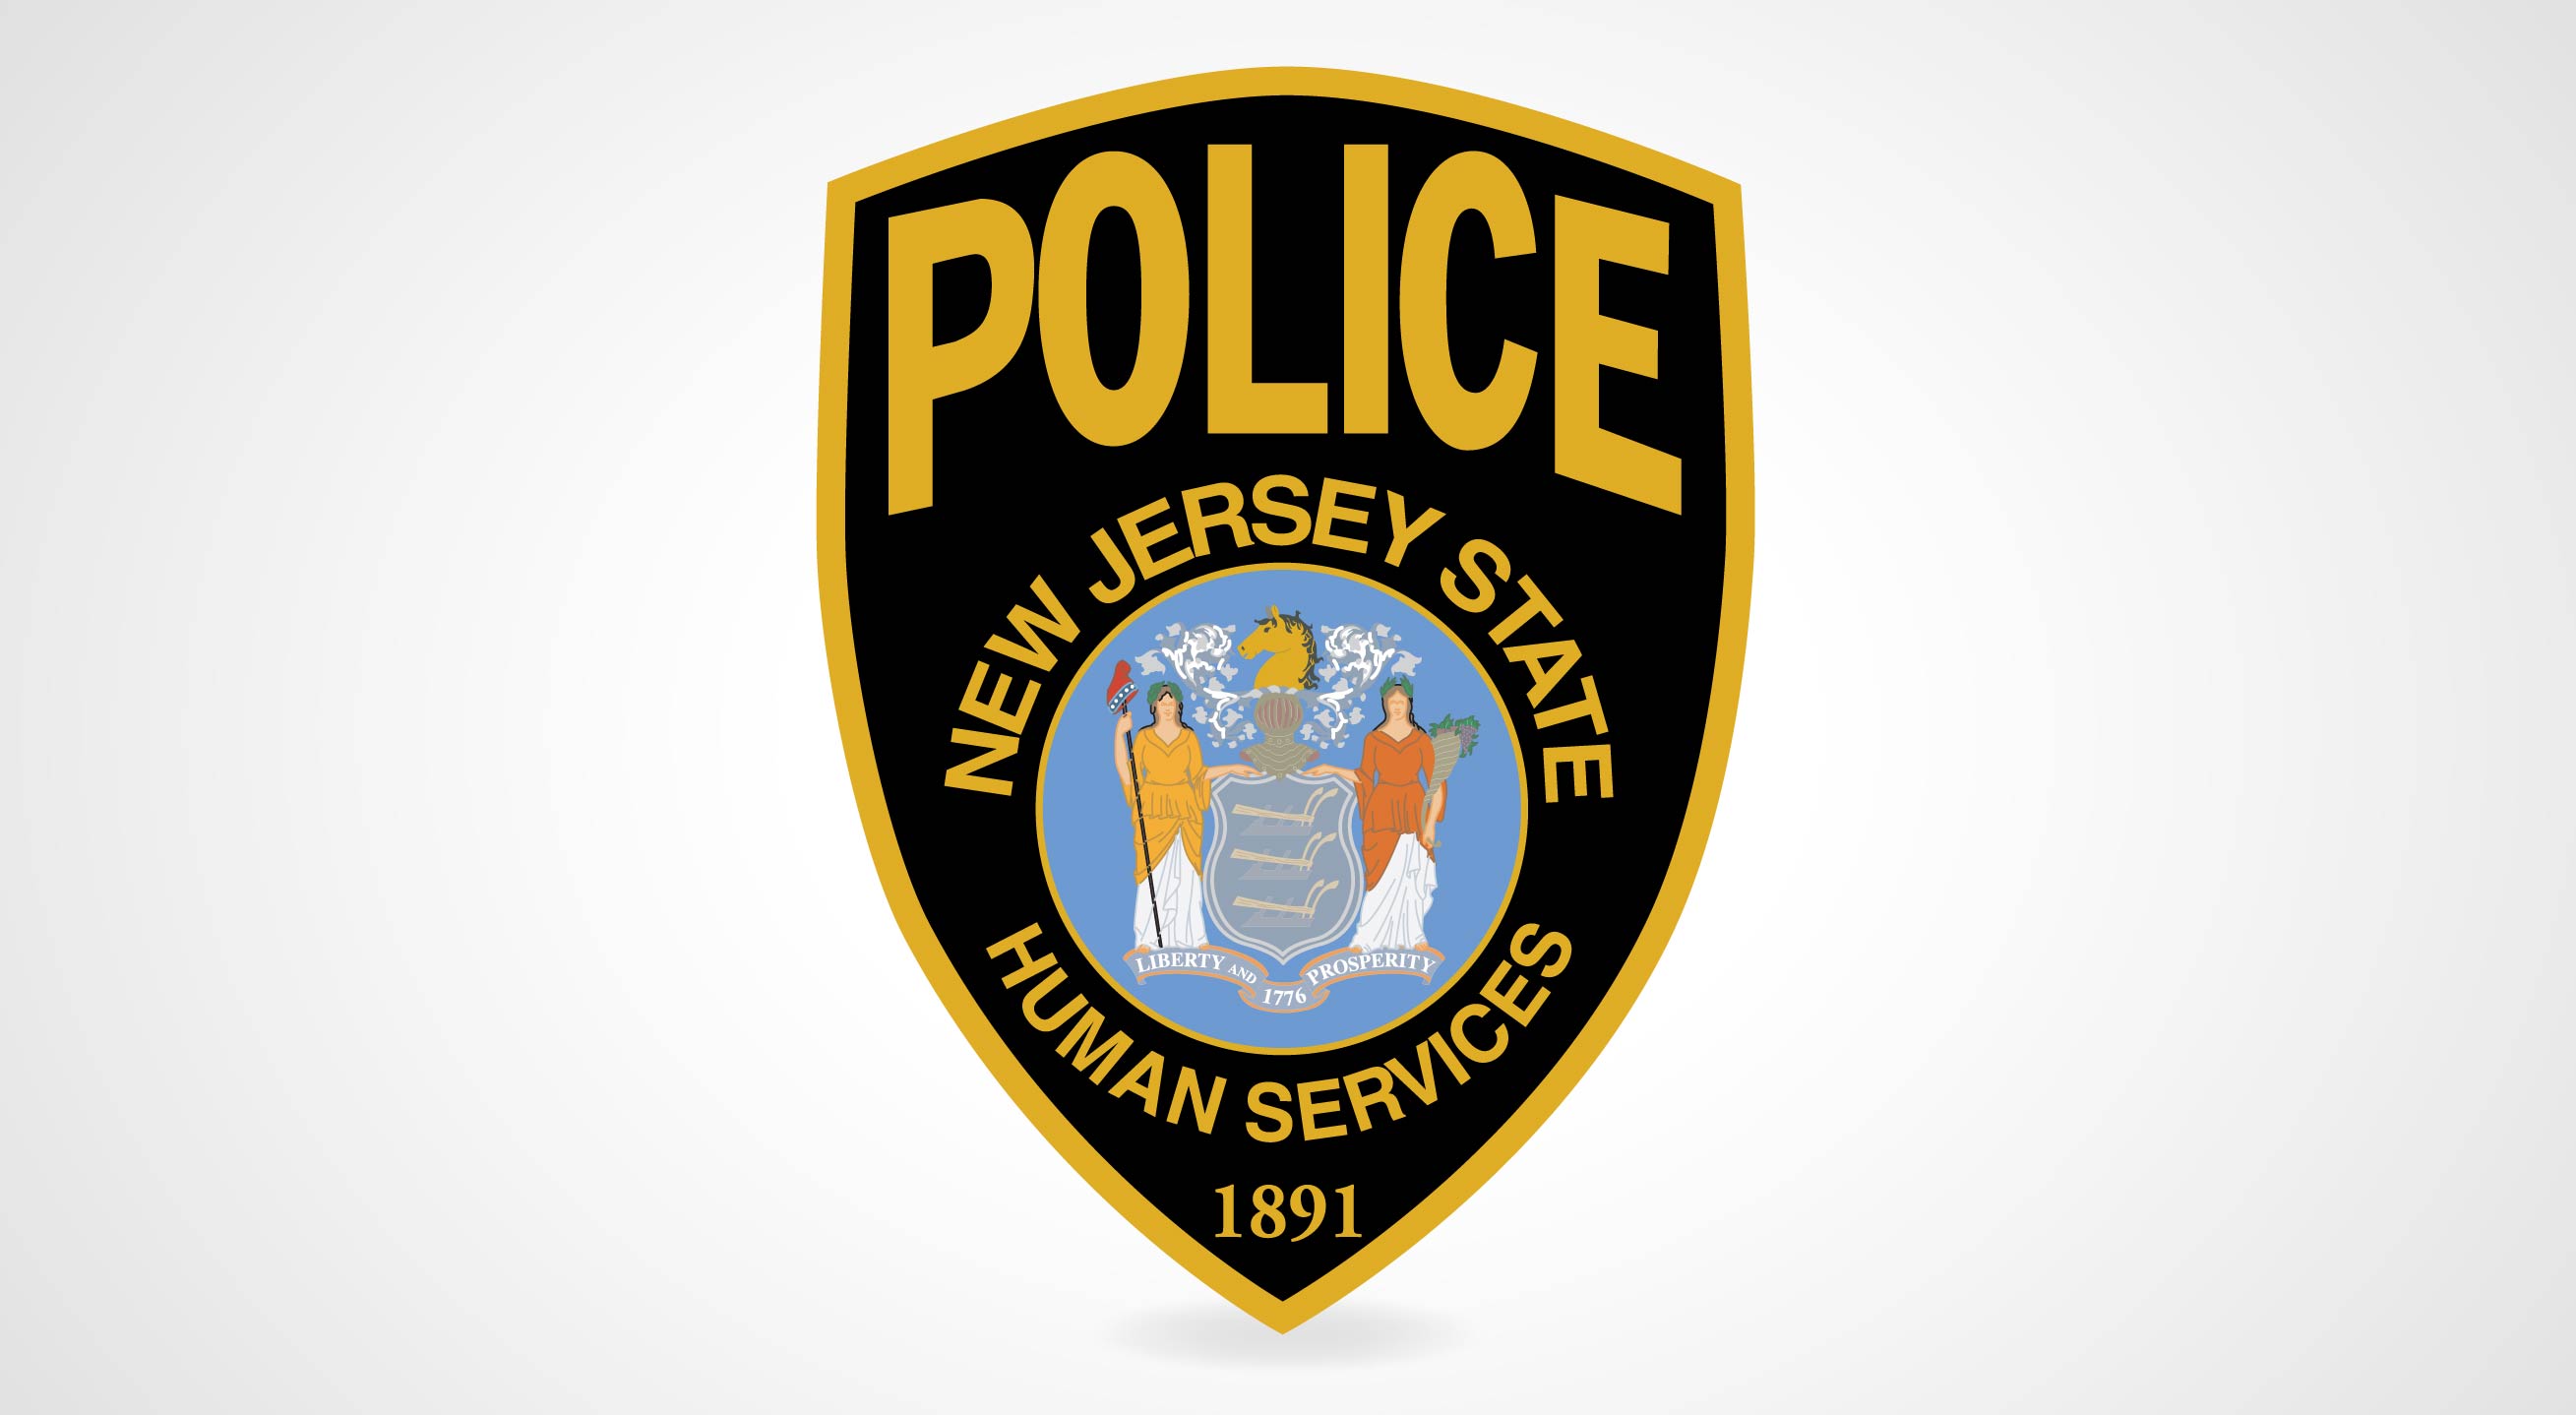 Human Services Honors its Police Officers for Protecting NJ’s Most Vulnerable